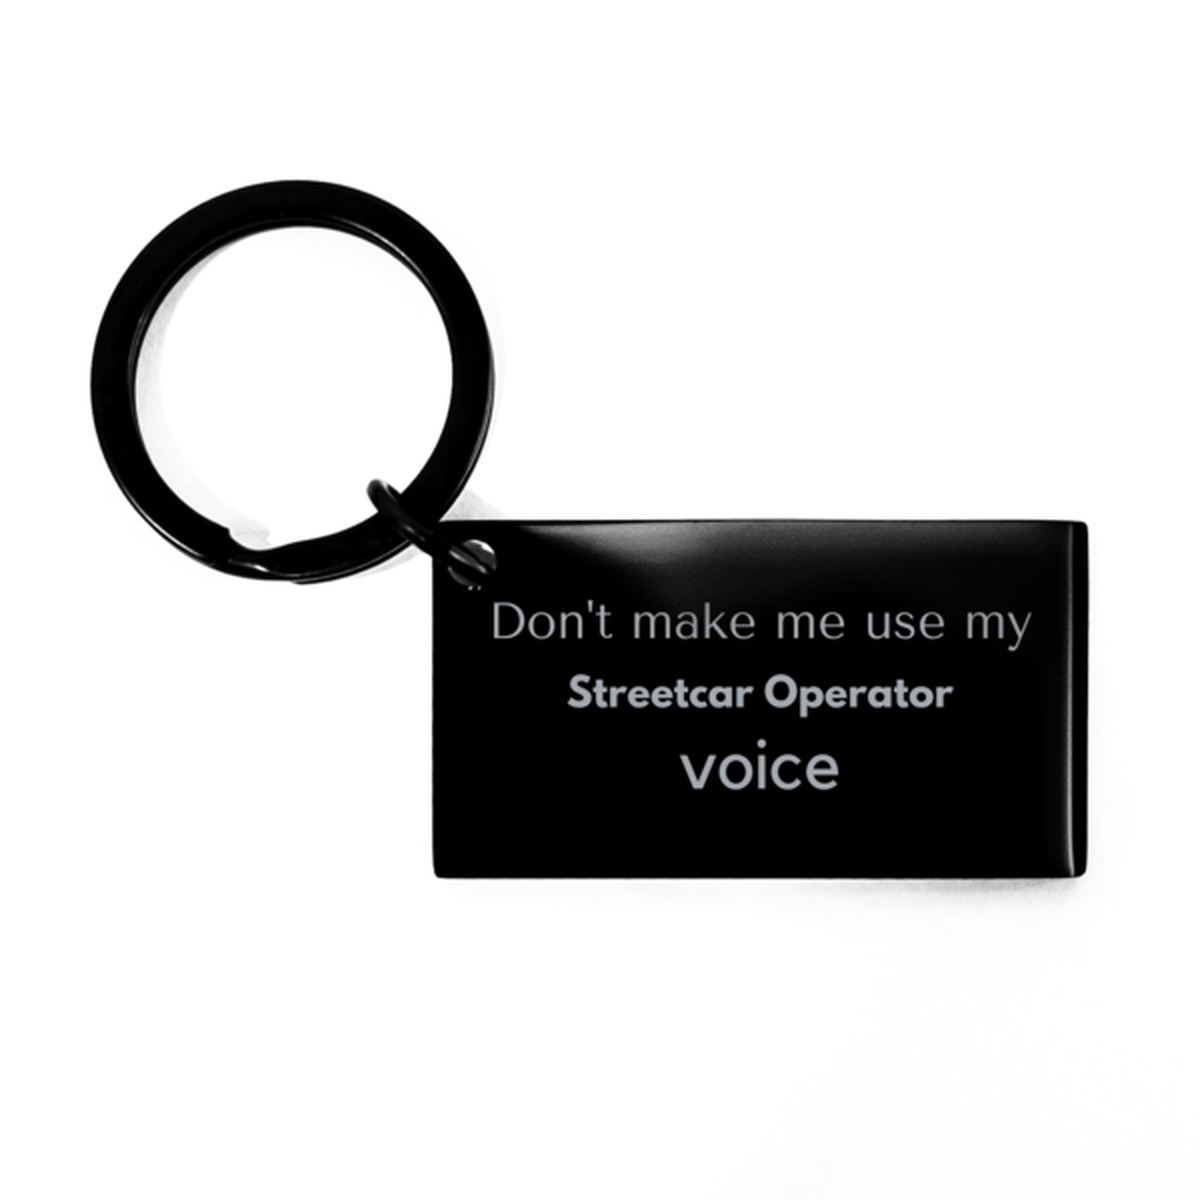 Don't make me use my Streetcar Operator voice, Sarcasm Streetcar Operator Gifts, Christmas Streetcar Operator Keychain Birthday Unique Gifts For Streetcar Operator Coworkers, Men, Women, Colleague, Friends